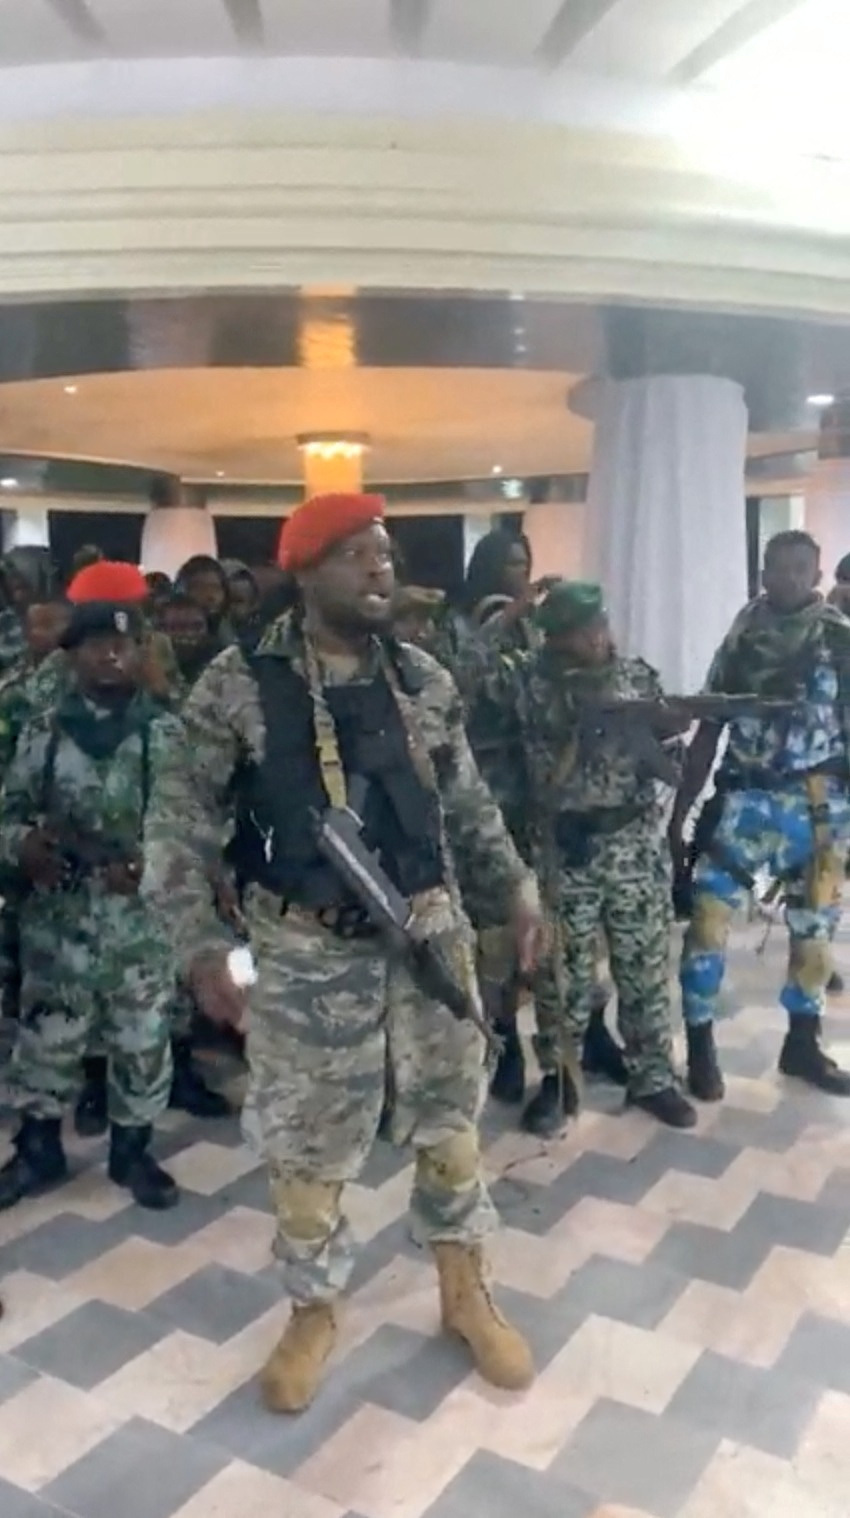 A man in military fatigues speaks inside the Palace of the Nation during an attempted coup in Kinshasa